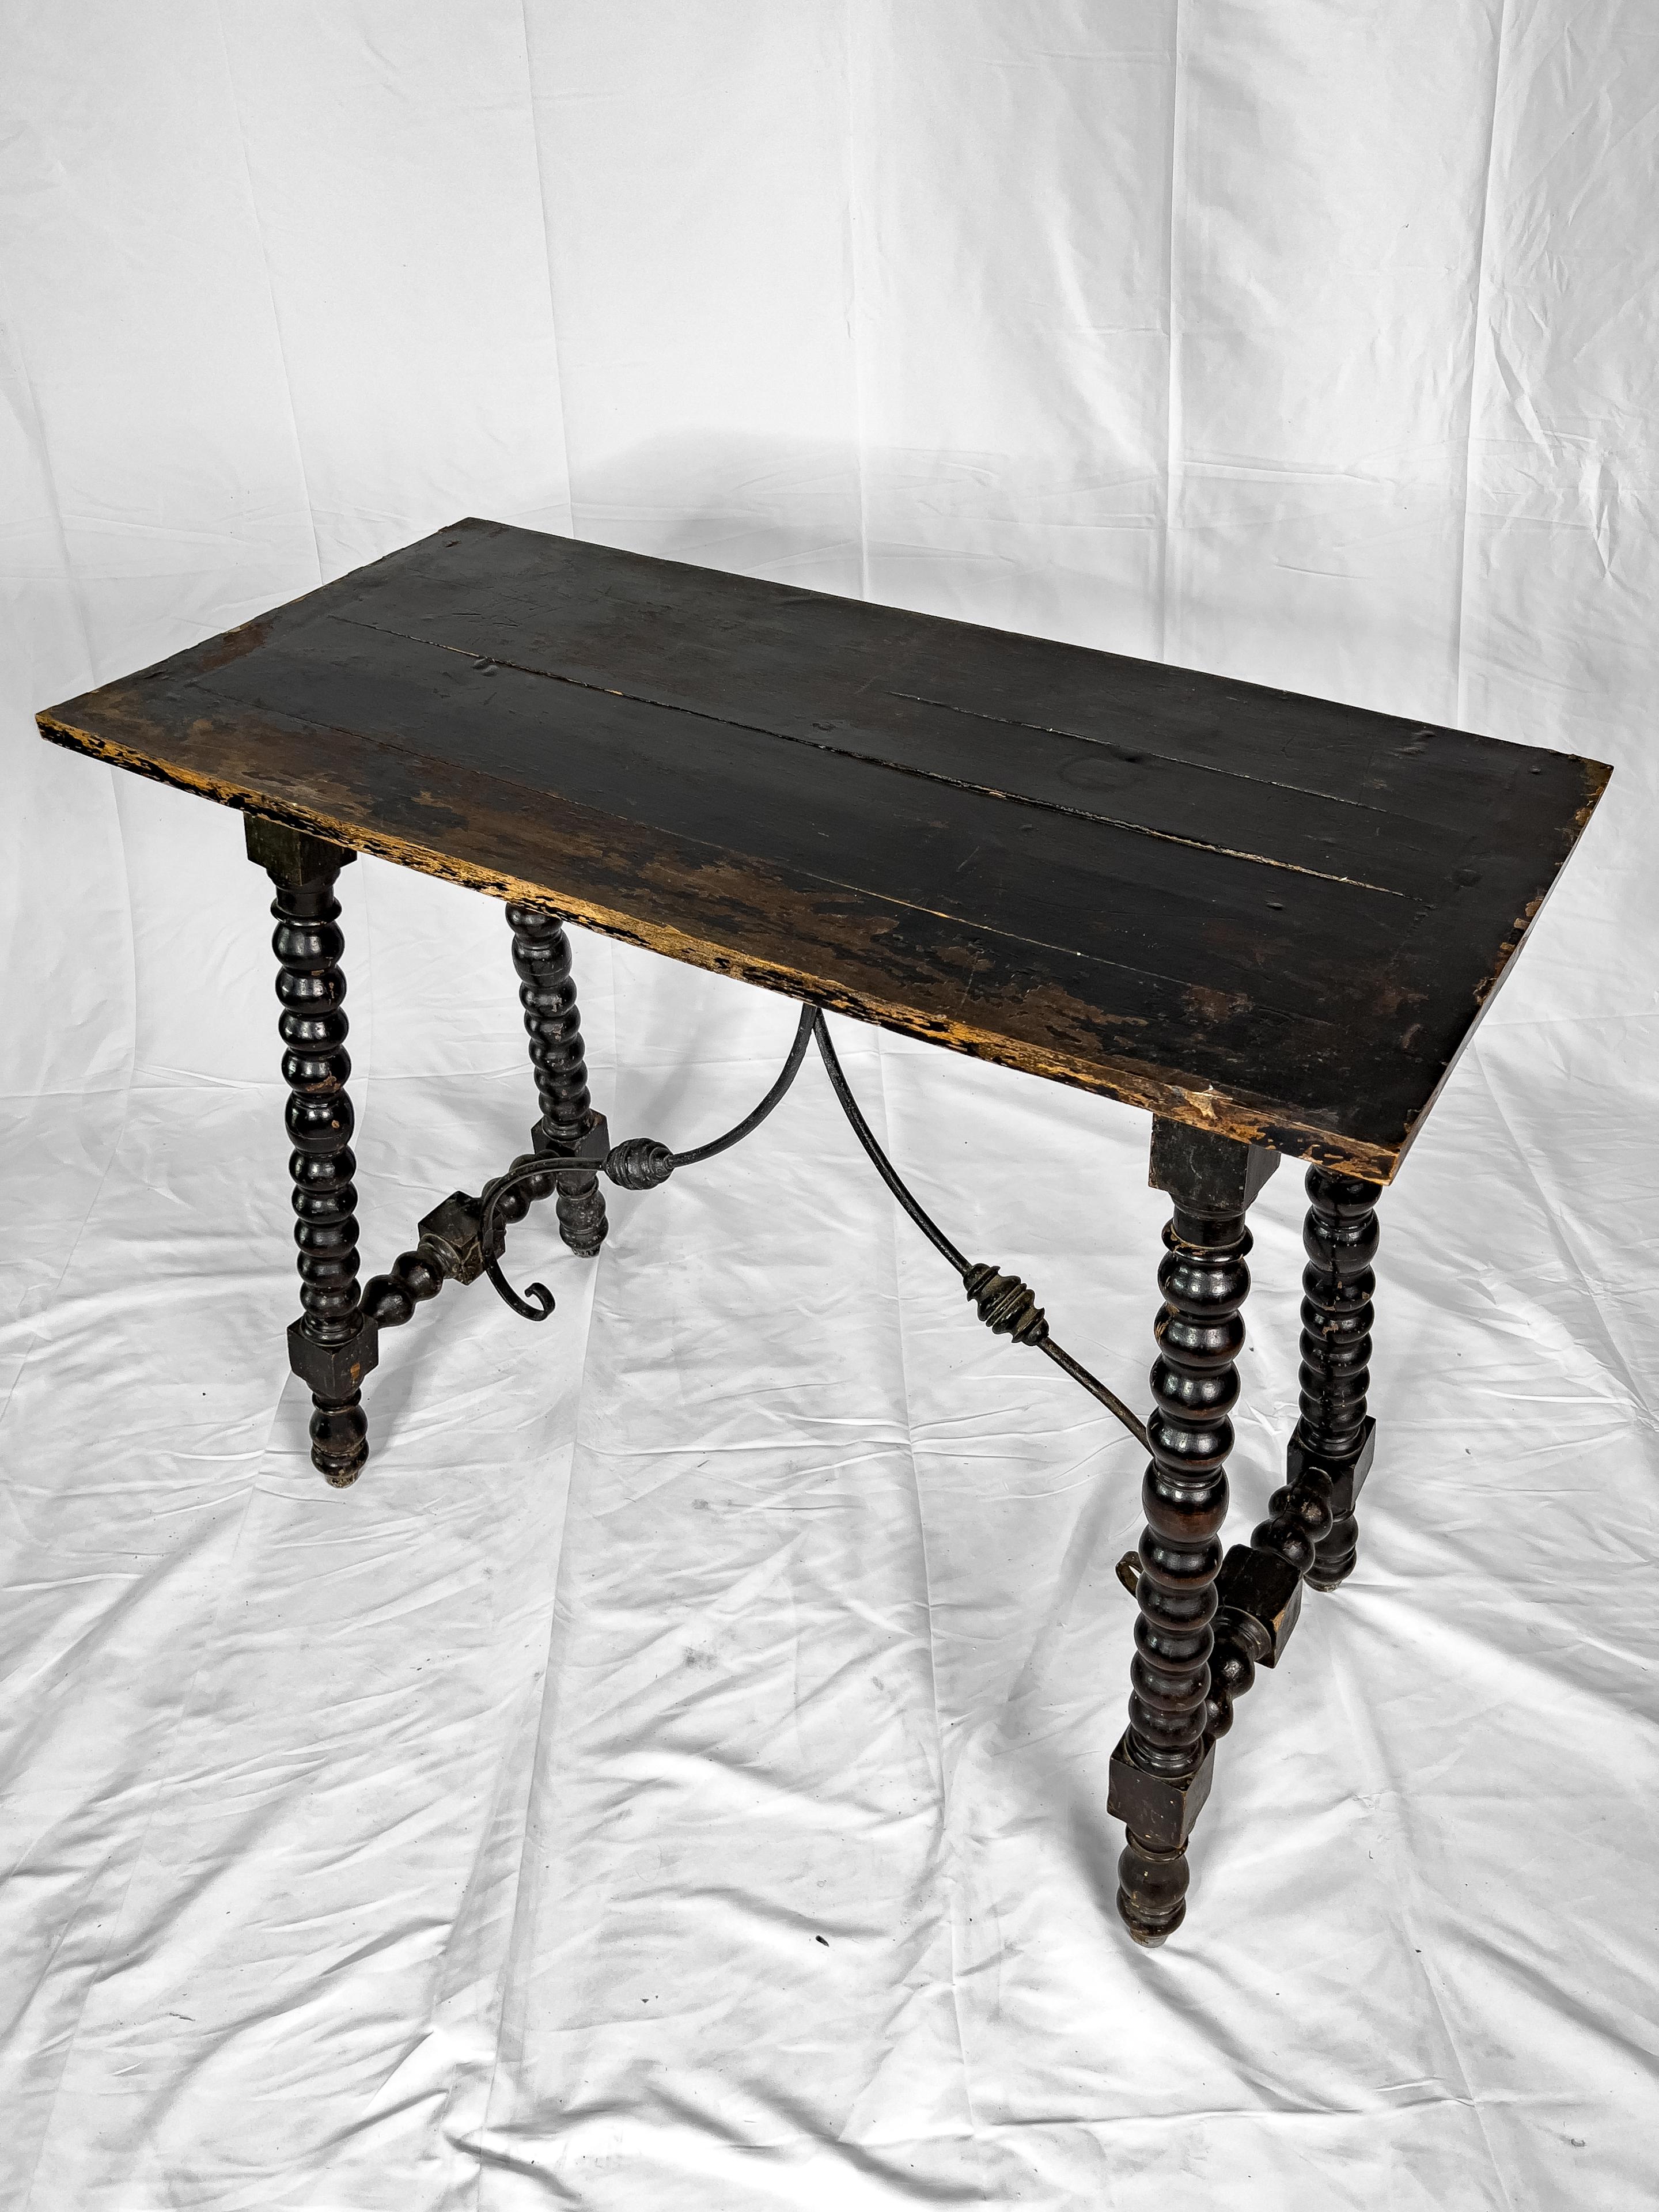 18th century Spanish console table having bobbin turned legs with a shaped iron trestle and a painted finish.